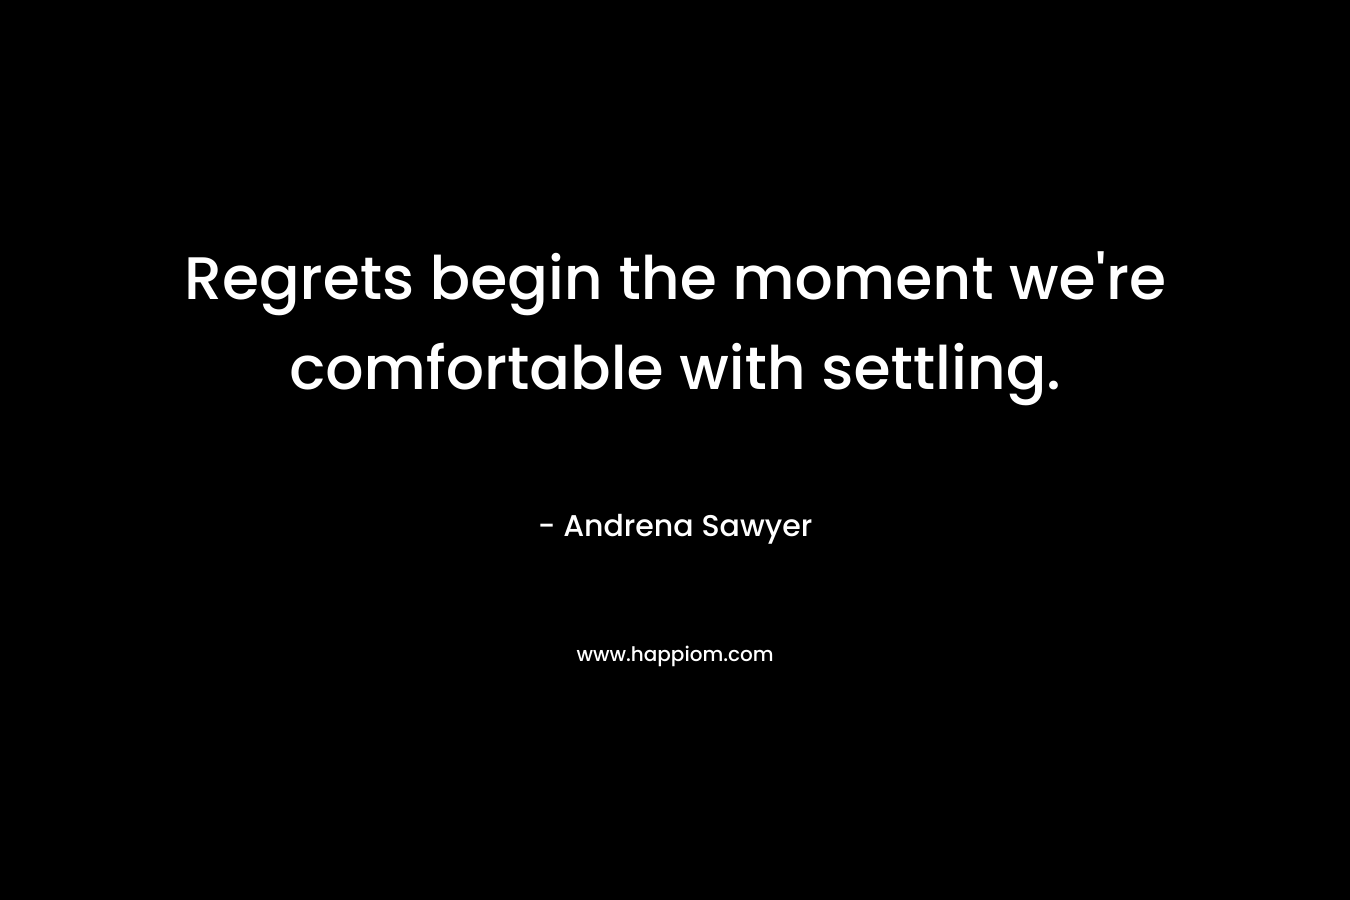 Regrets begin the moment we're comfortable with settling.